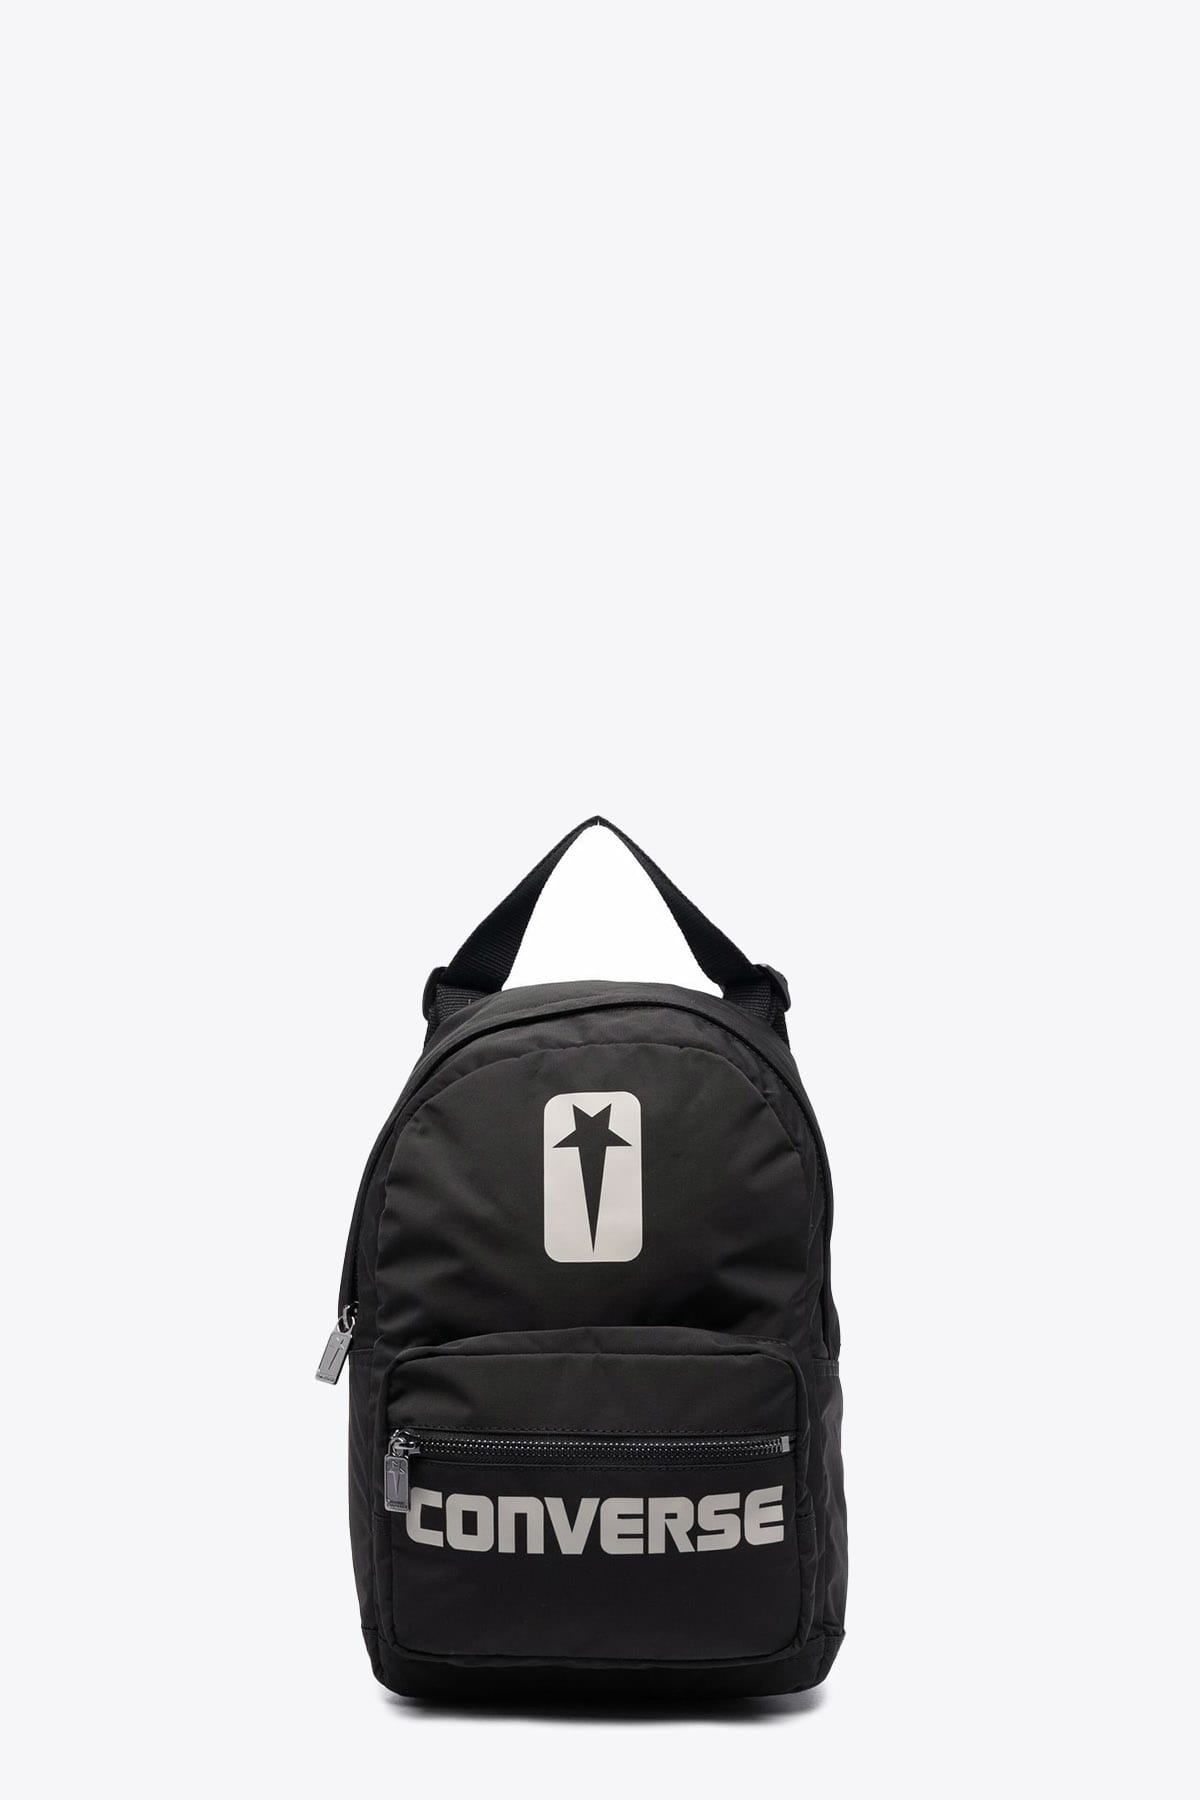 DRKSHDW Go Lo Backpack Black nylon backpack in collaboration with Converse - Go Lo backpack